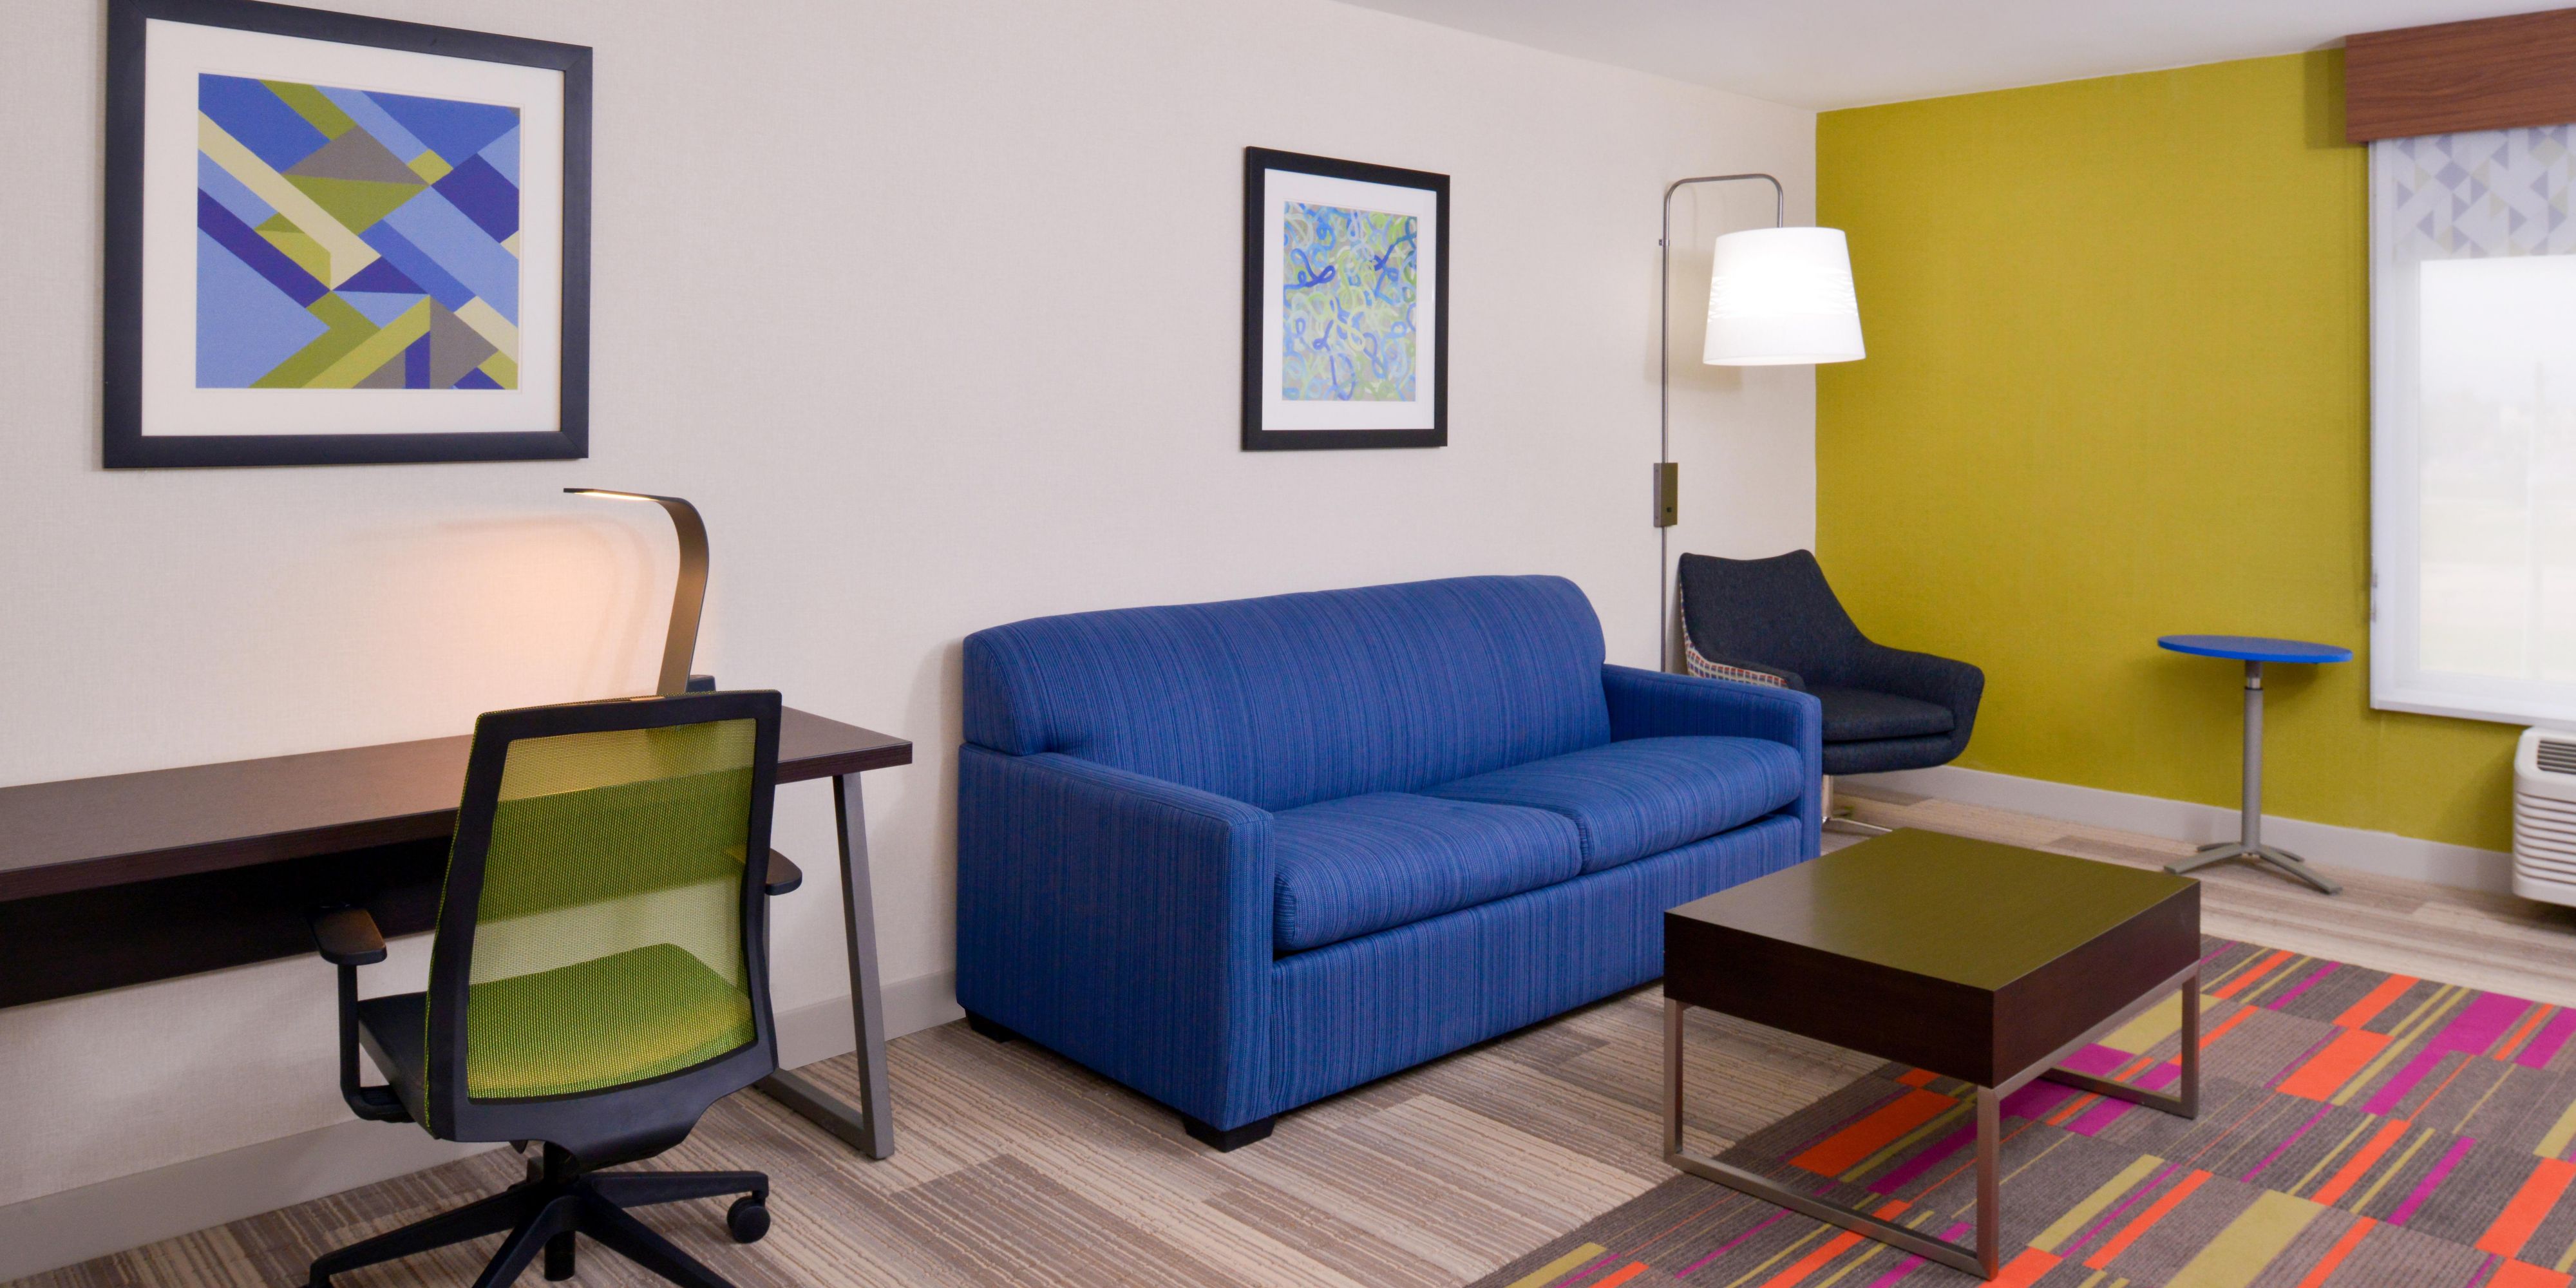 The guest rooms include brand new desks , nightstands, closets and a new 50" HDTV.